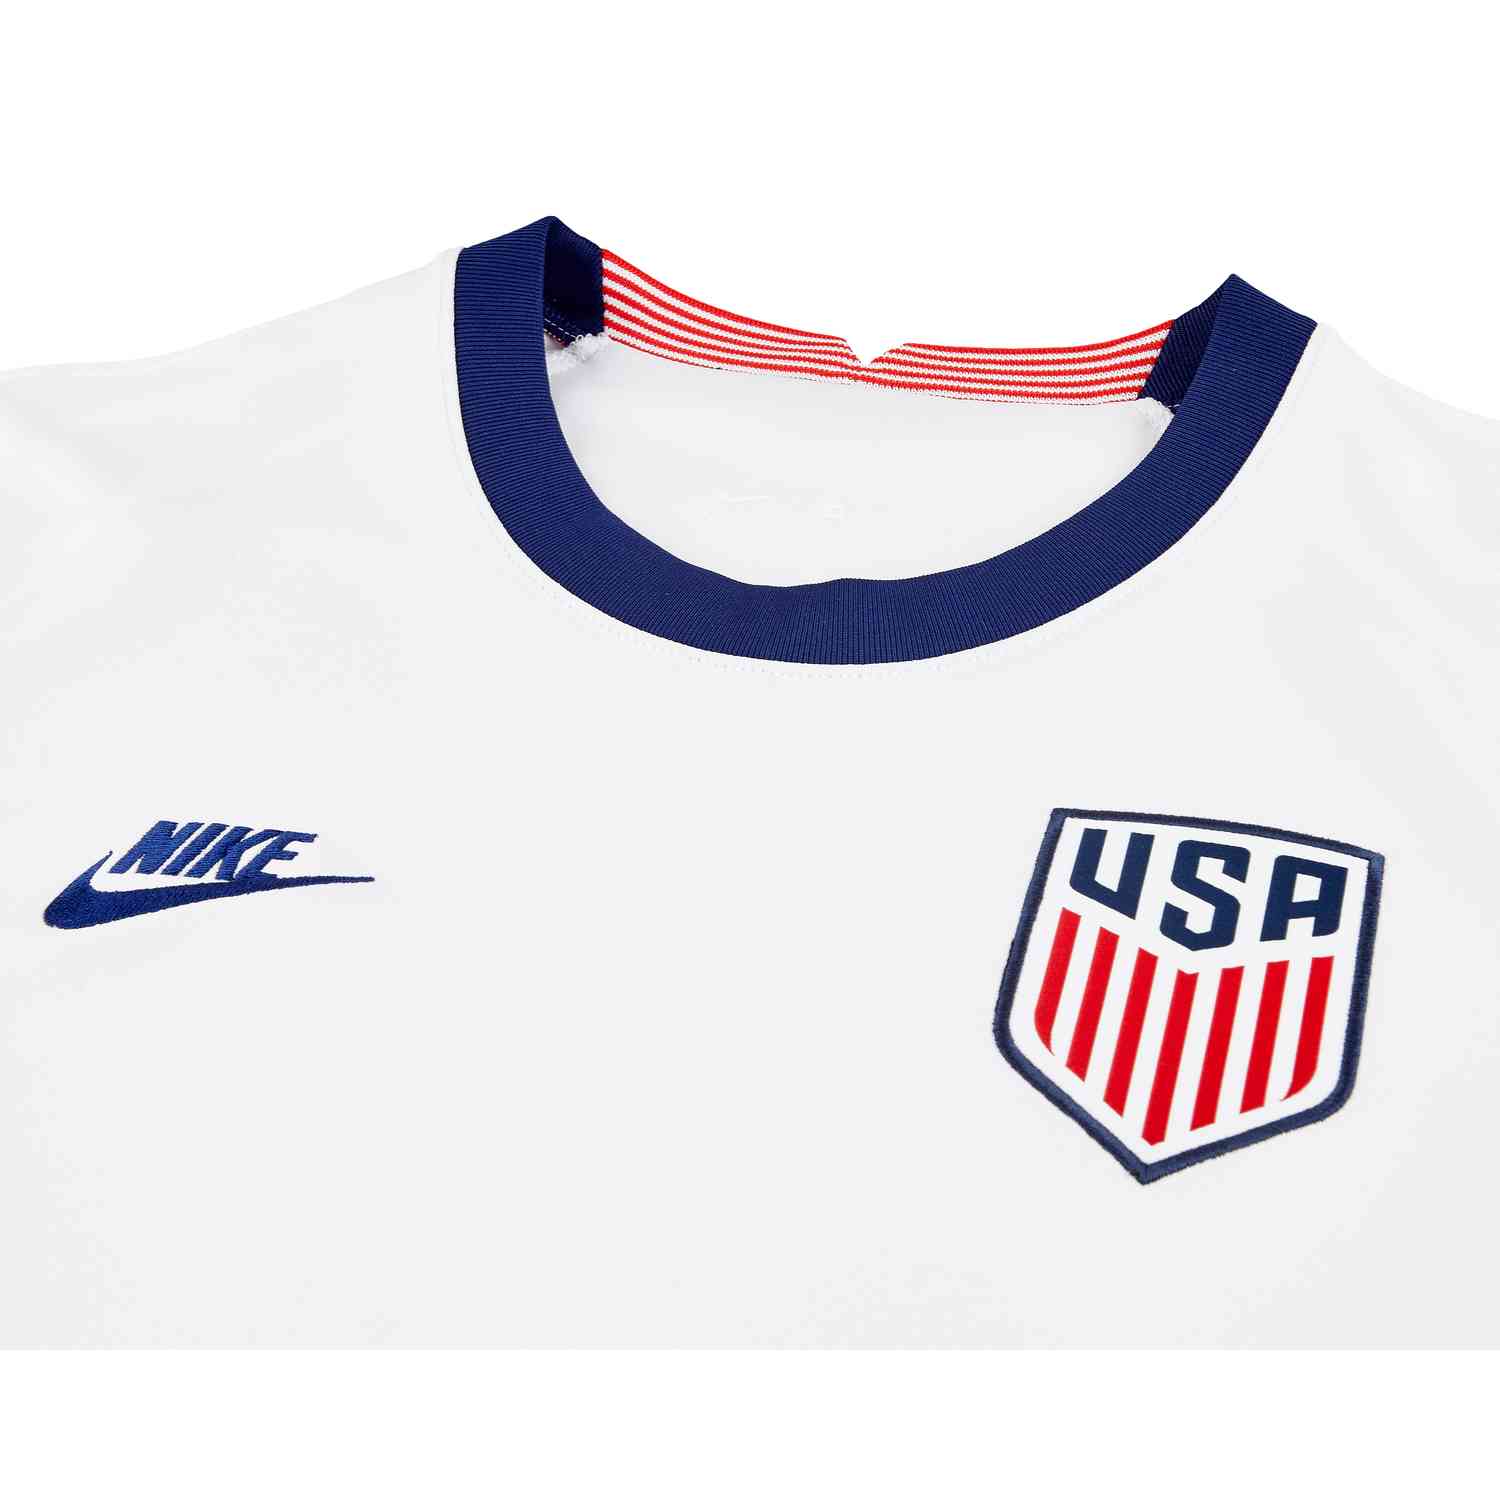 pulisic youth jersey